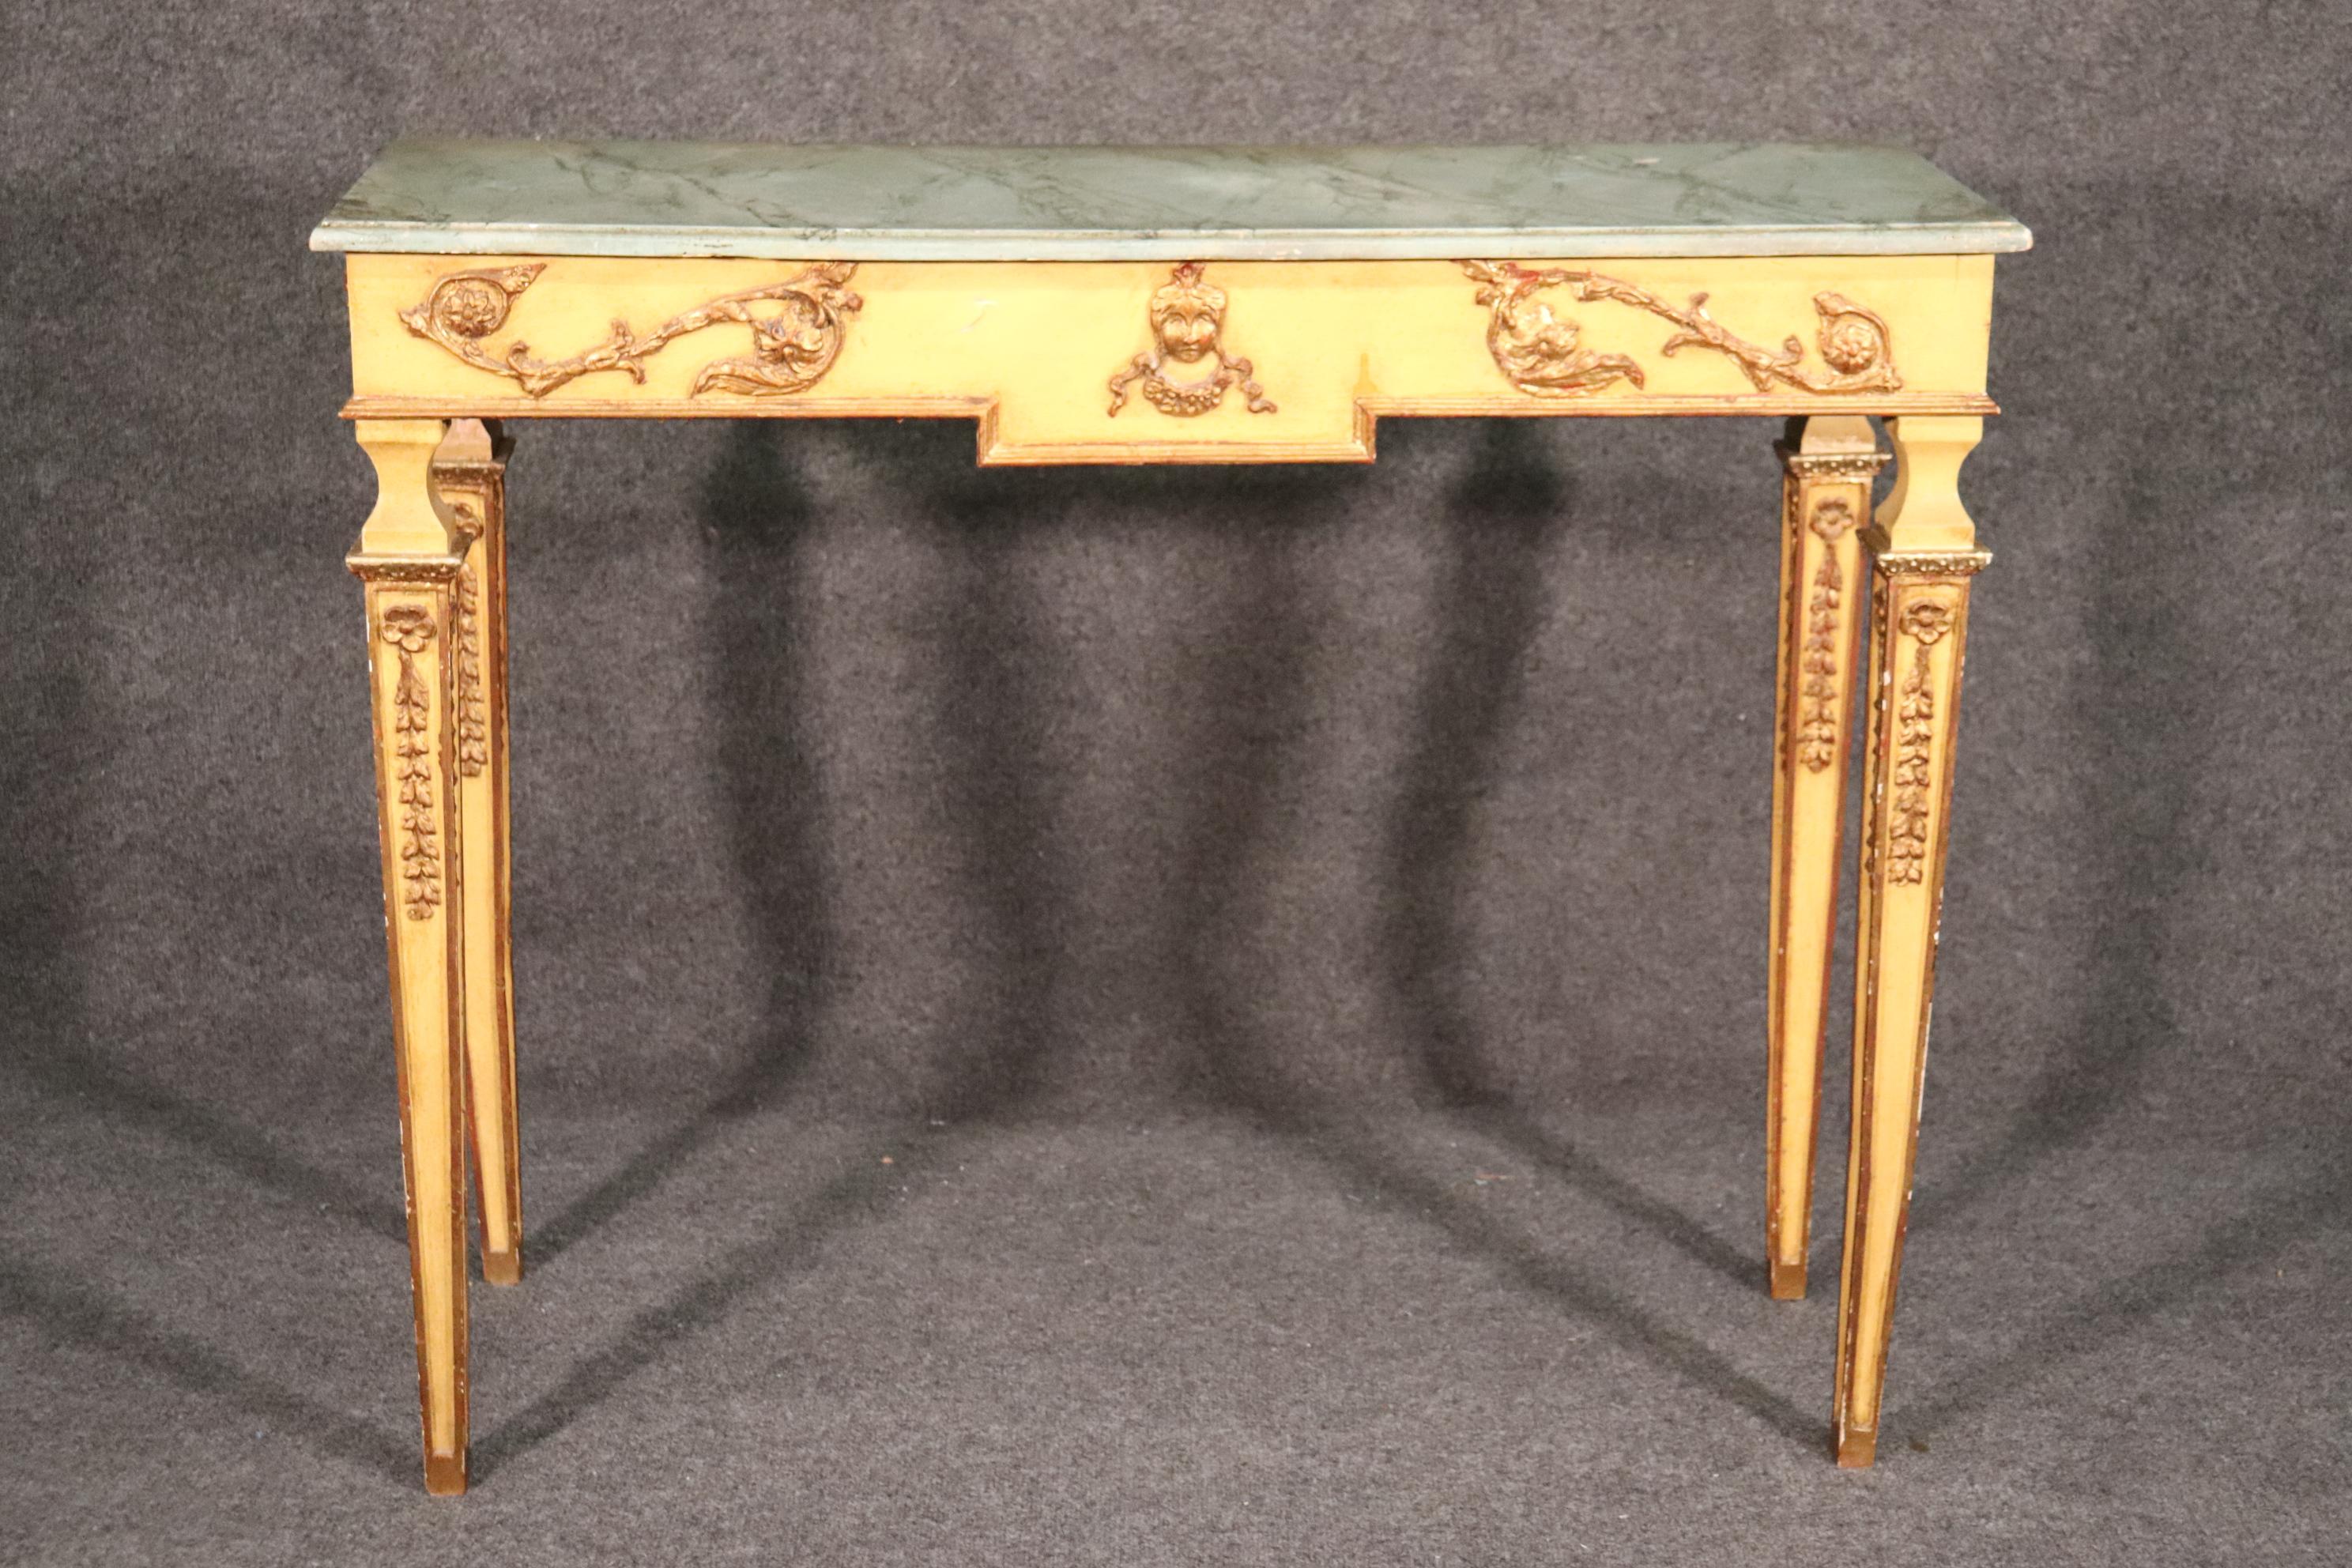 This table has a faux marble paint decorated top with gorgeous gold leaf and a creme painted frame. The faux marble is in good condition and very well done. The table dates to the 1940s era and measures 44 wide x 15 deep x 35 tall.